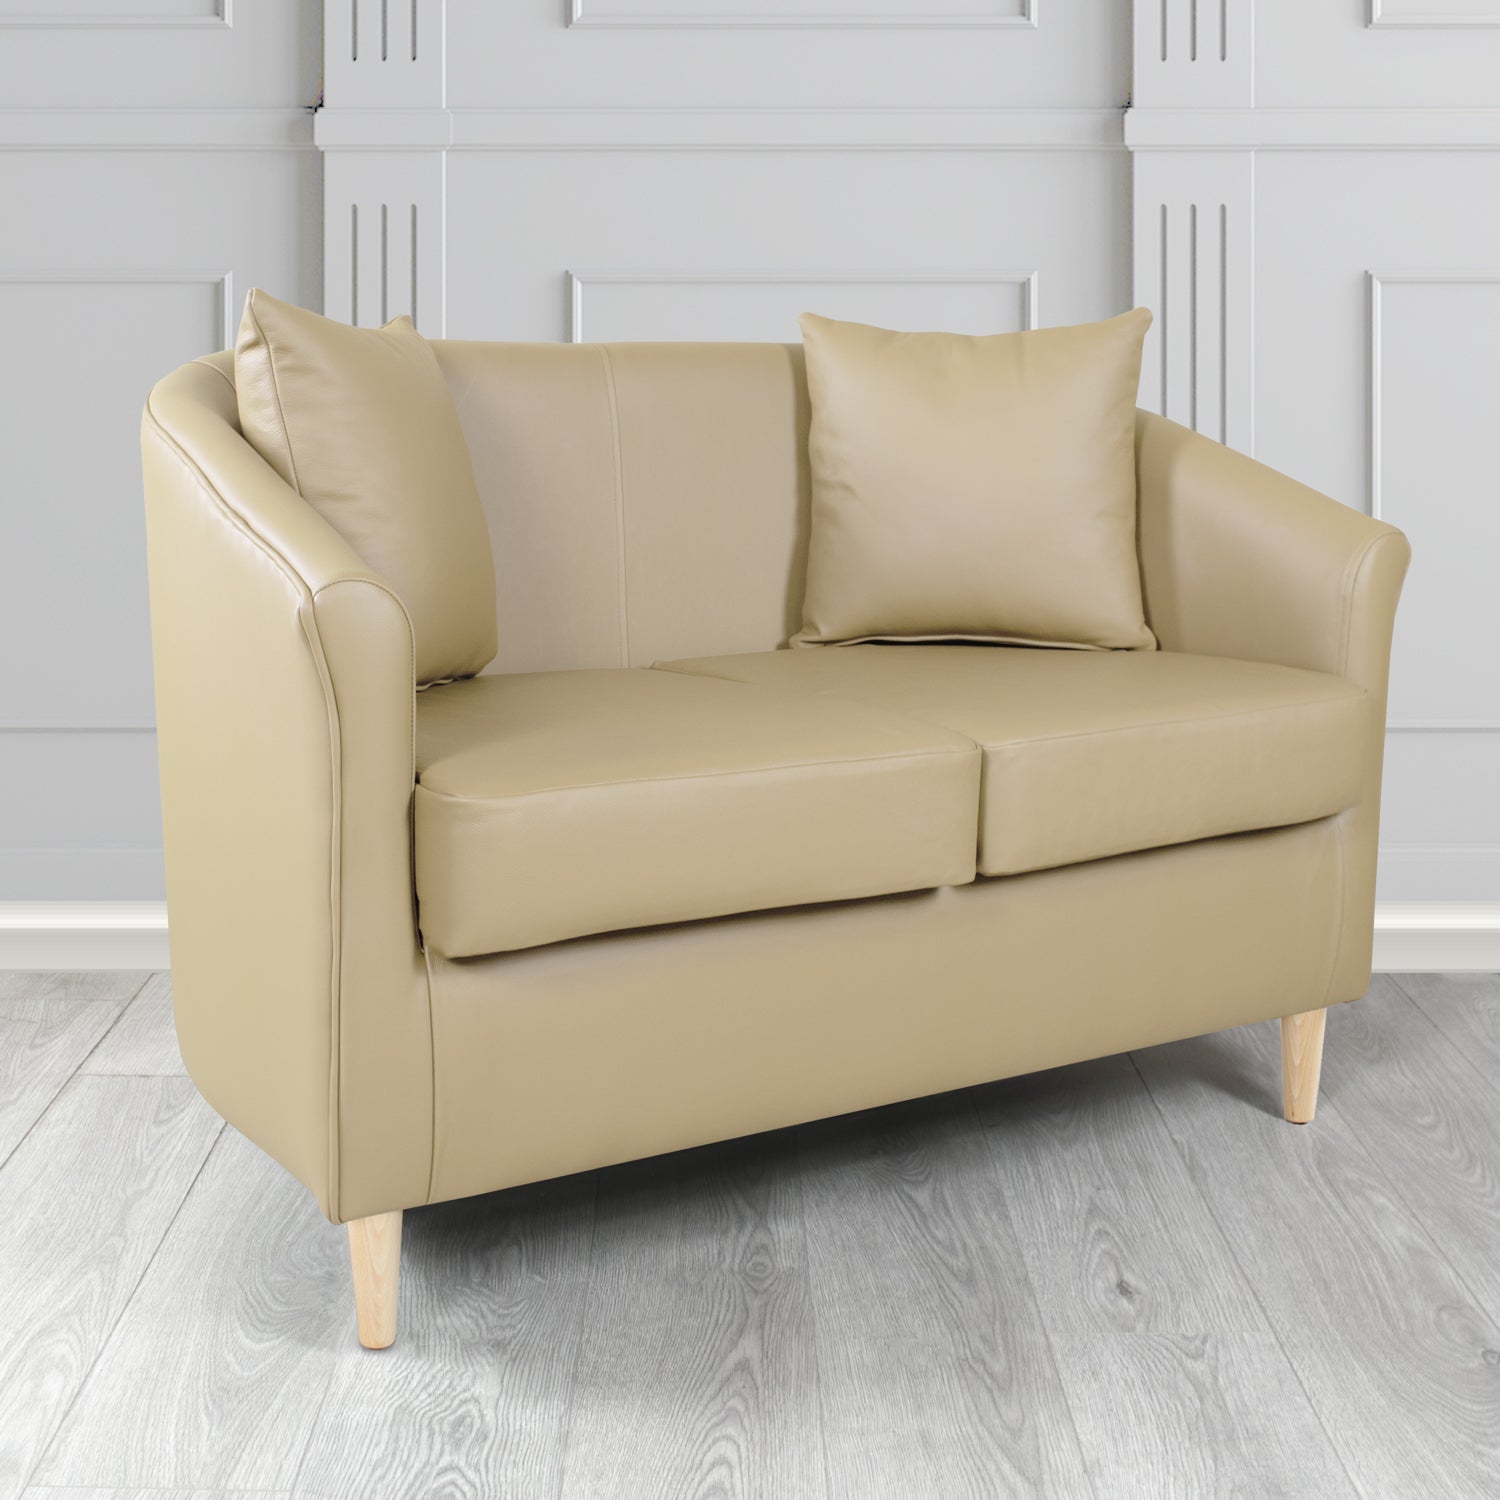 St Tropez Shelly Pebble Crib 5 Genuine Leather 2 Seater Tub Sofa with Scatter Cushions - The Tub Chair Shop